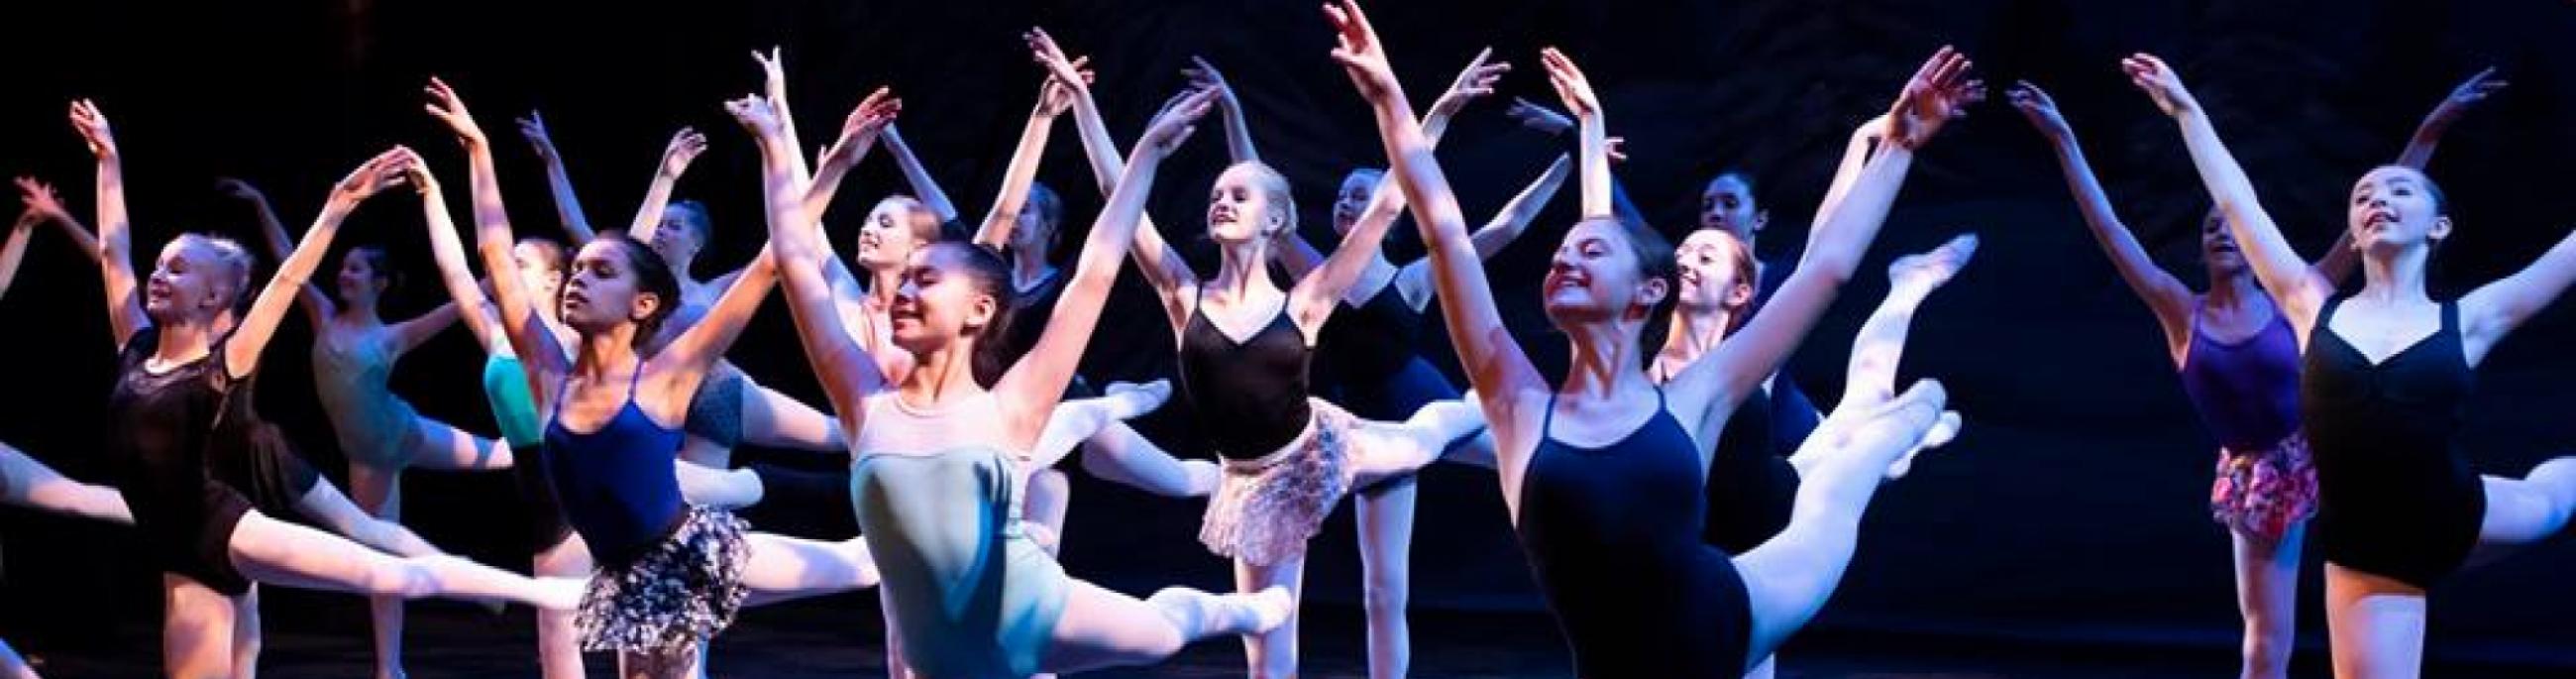 Ballet Etudes fulfills the artistic needs of serious young dancers who desire performing opportunities of the highest caliber.